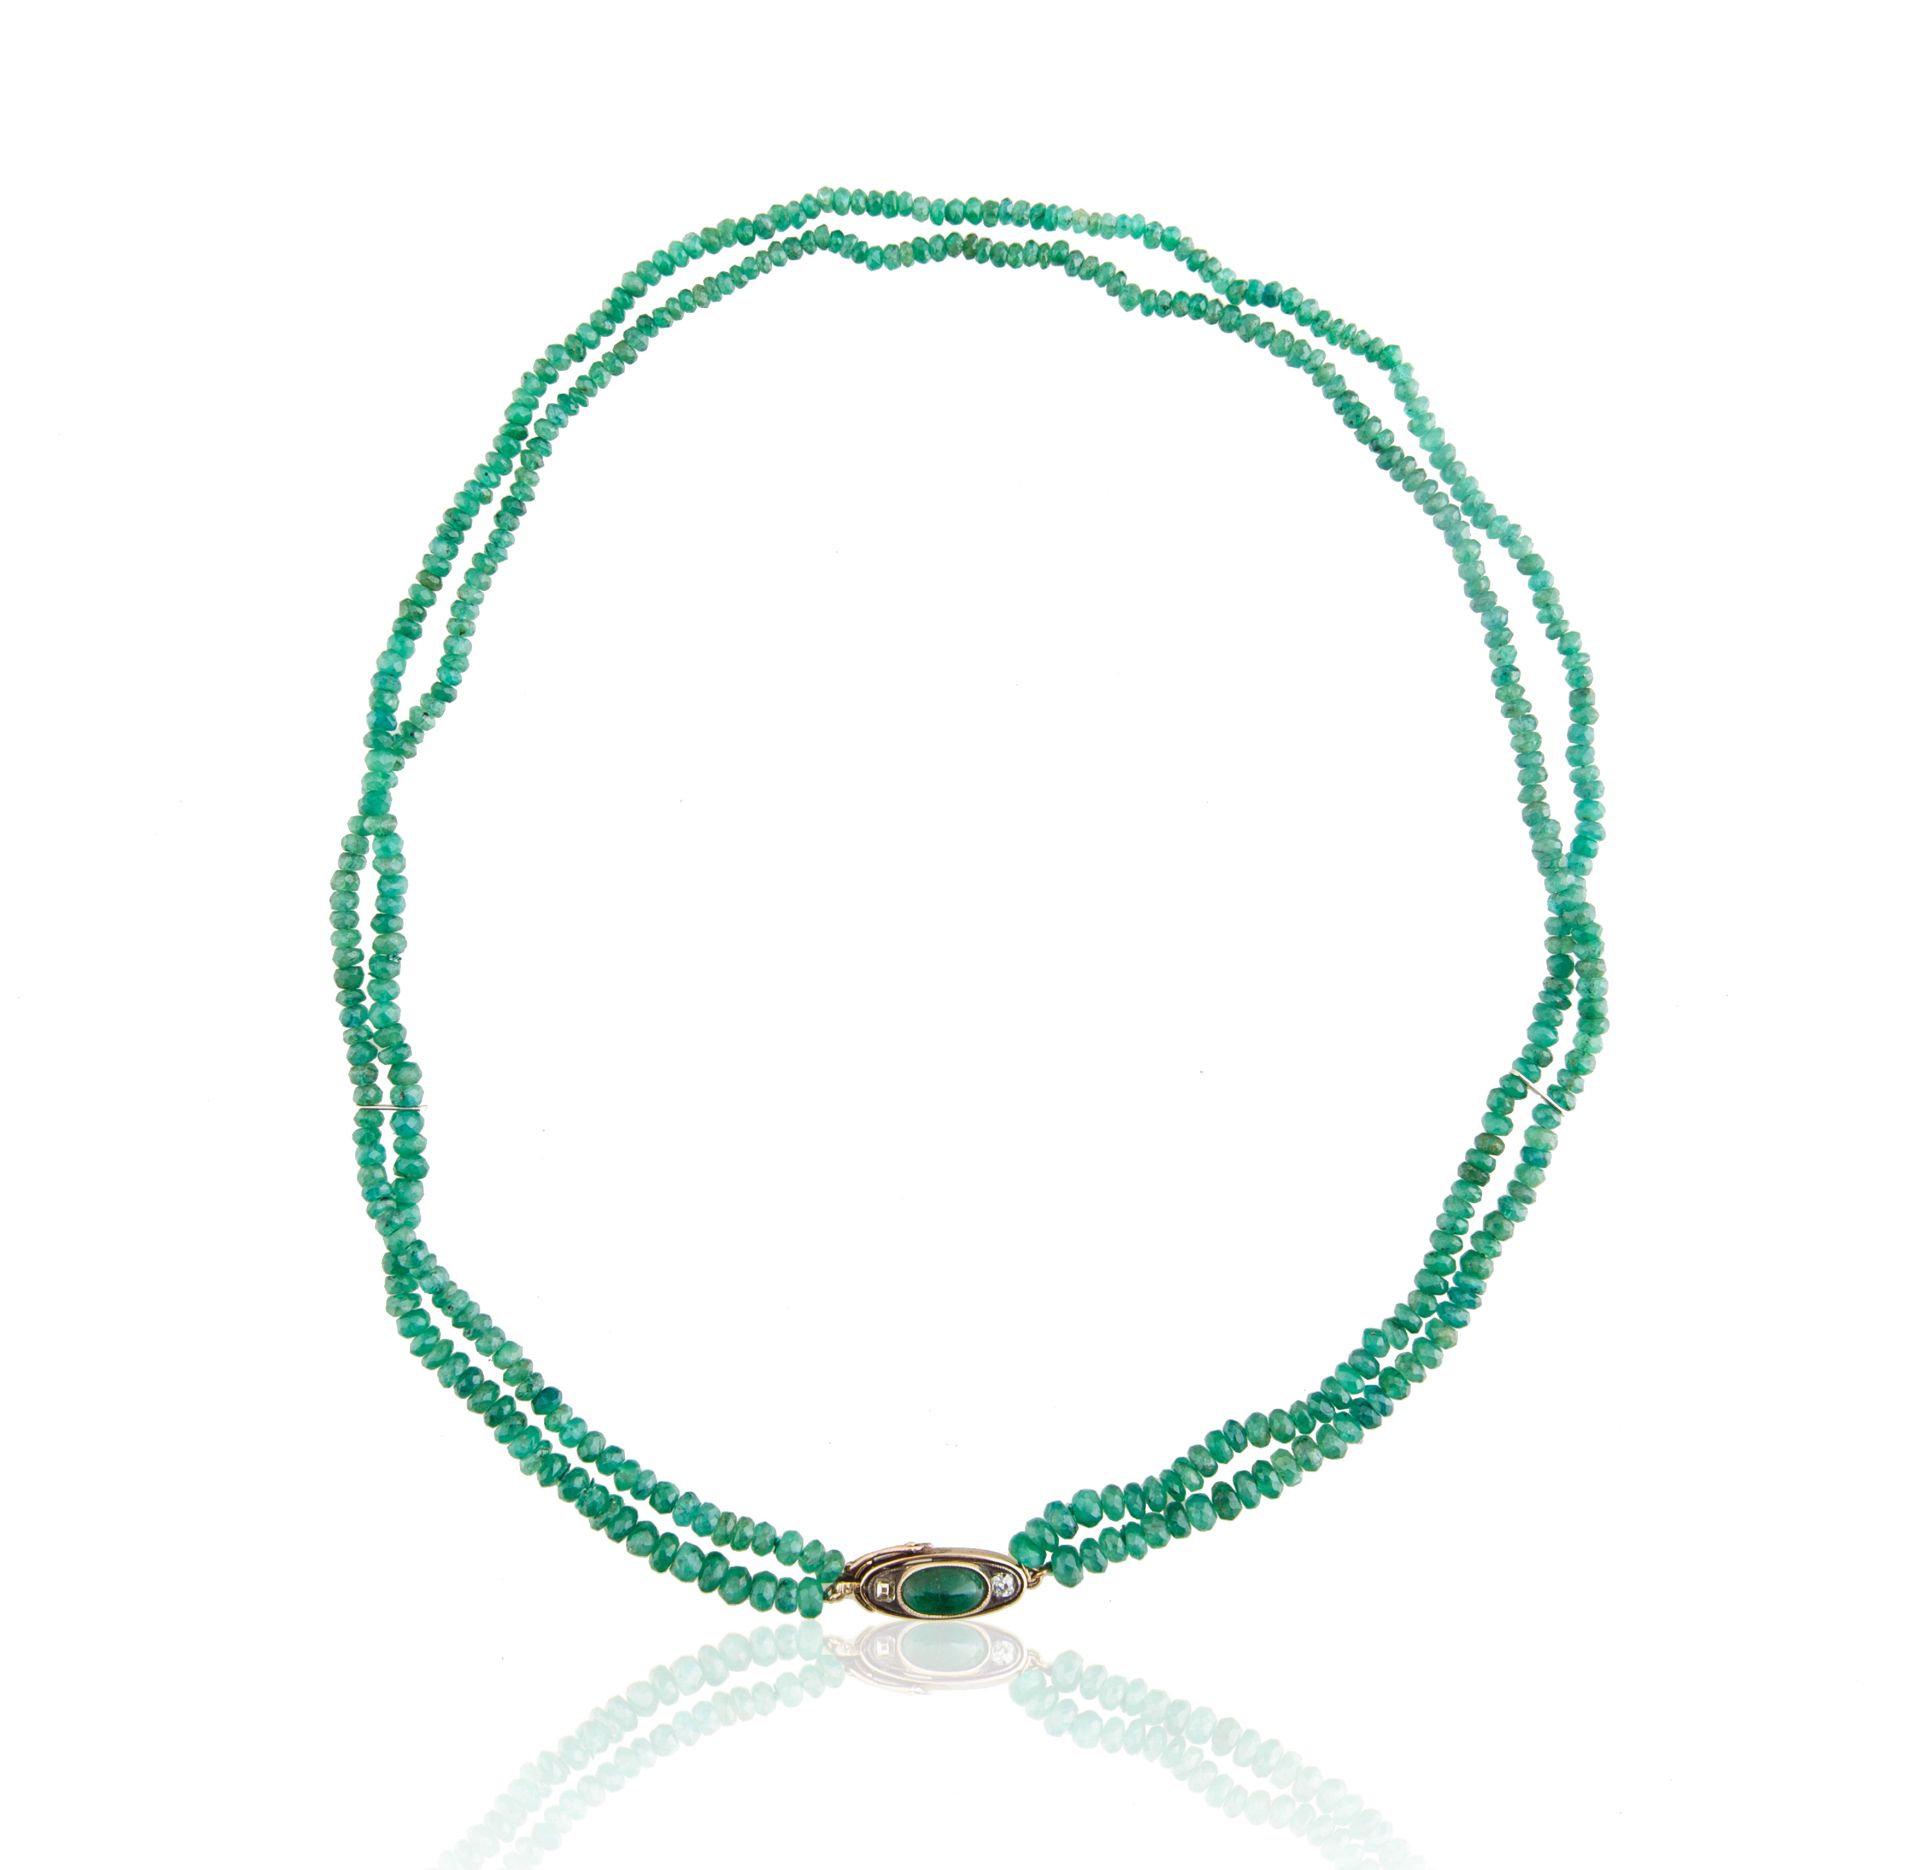 AN EMERALD, DIAMOND AND JADEITE BEADED NECKLACE, LIKELY FRENCH